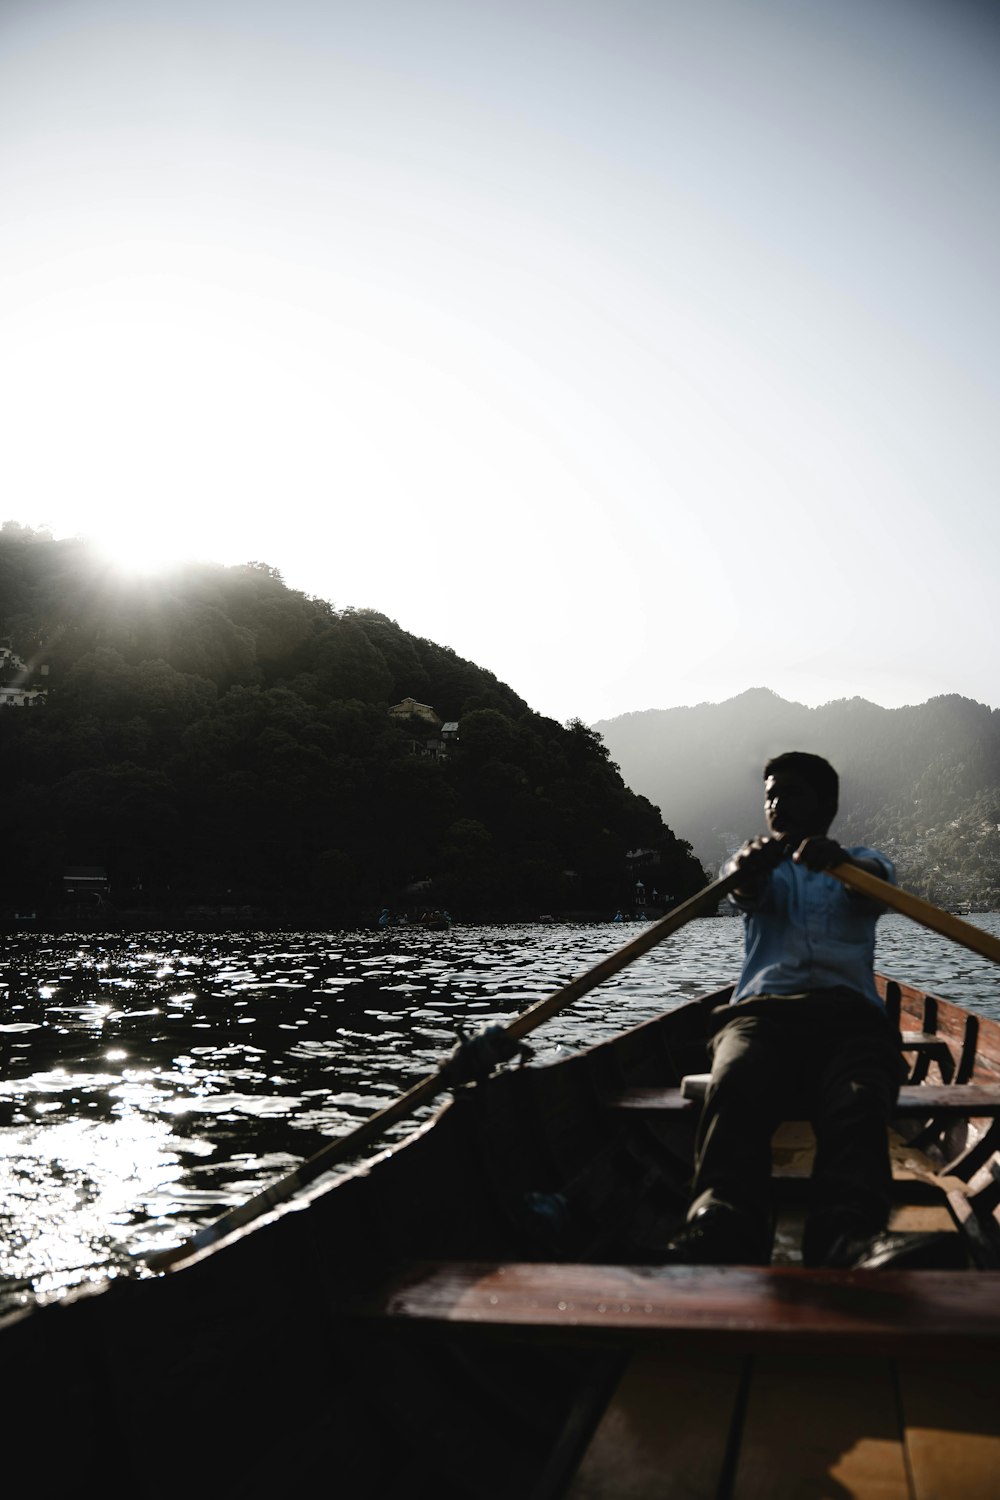 a man sitting in a boat on a body of water